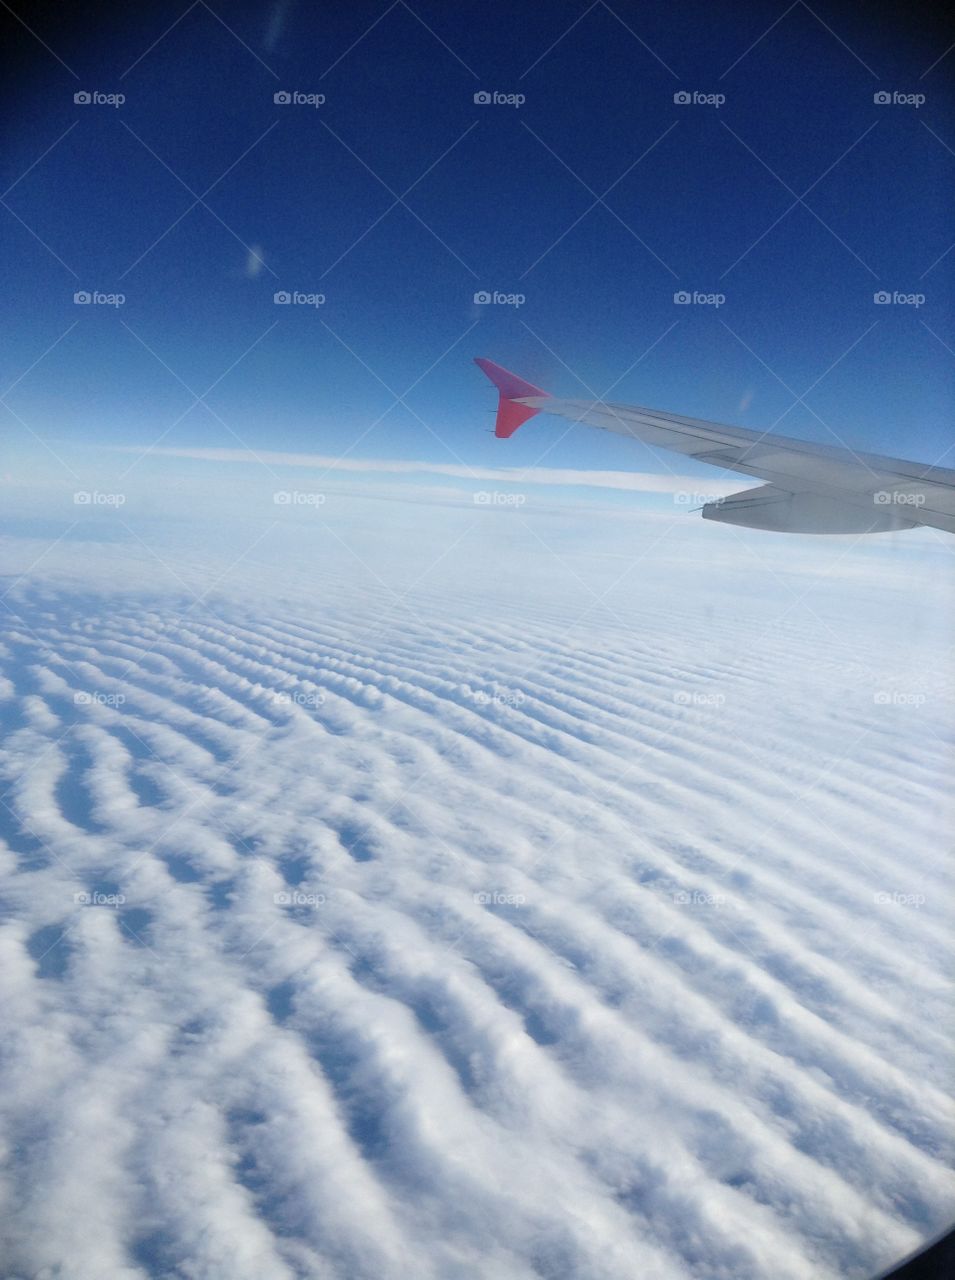 Cloud patterns by the wing. I thought his picture looked cool with the clouds patterned like this and with the airplane wing on the side